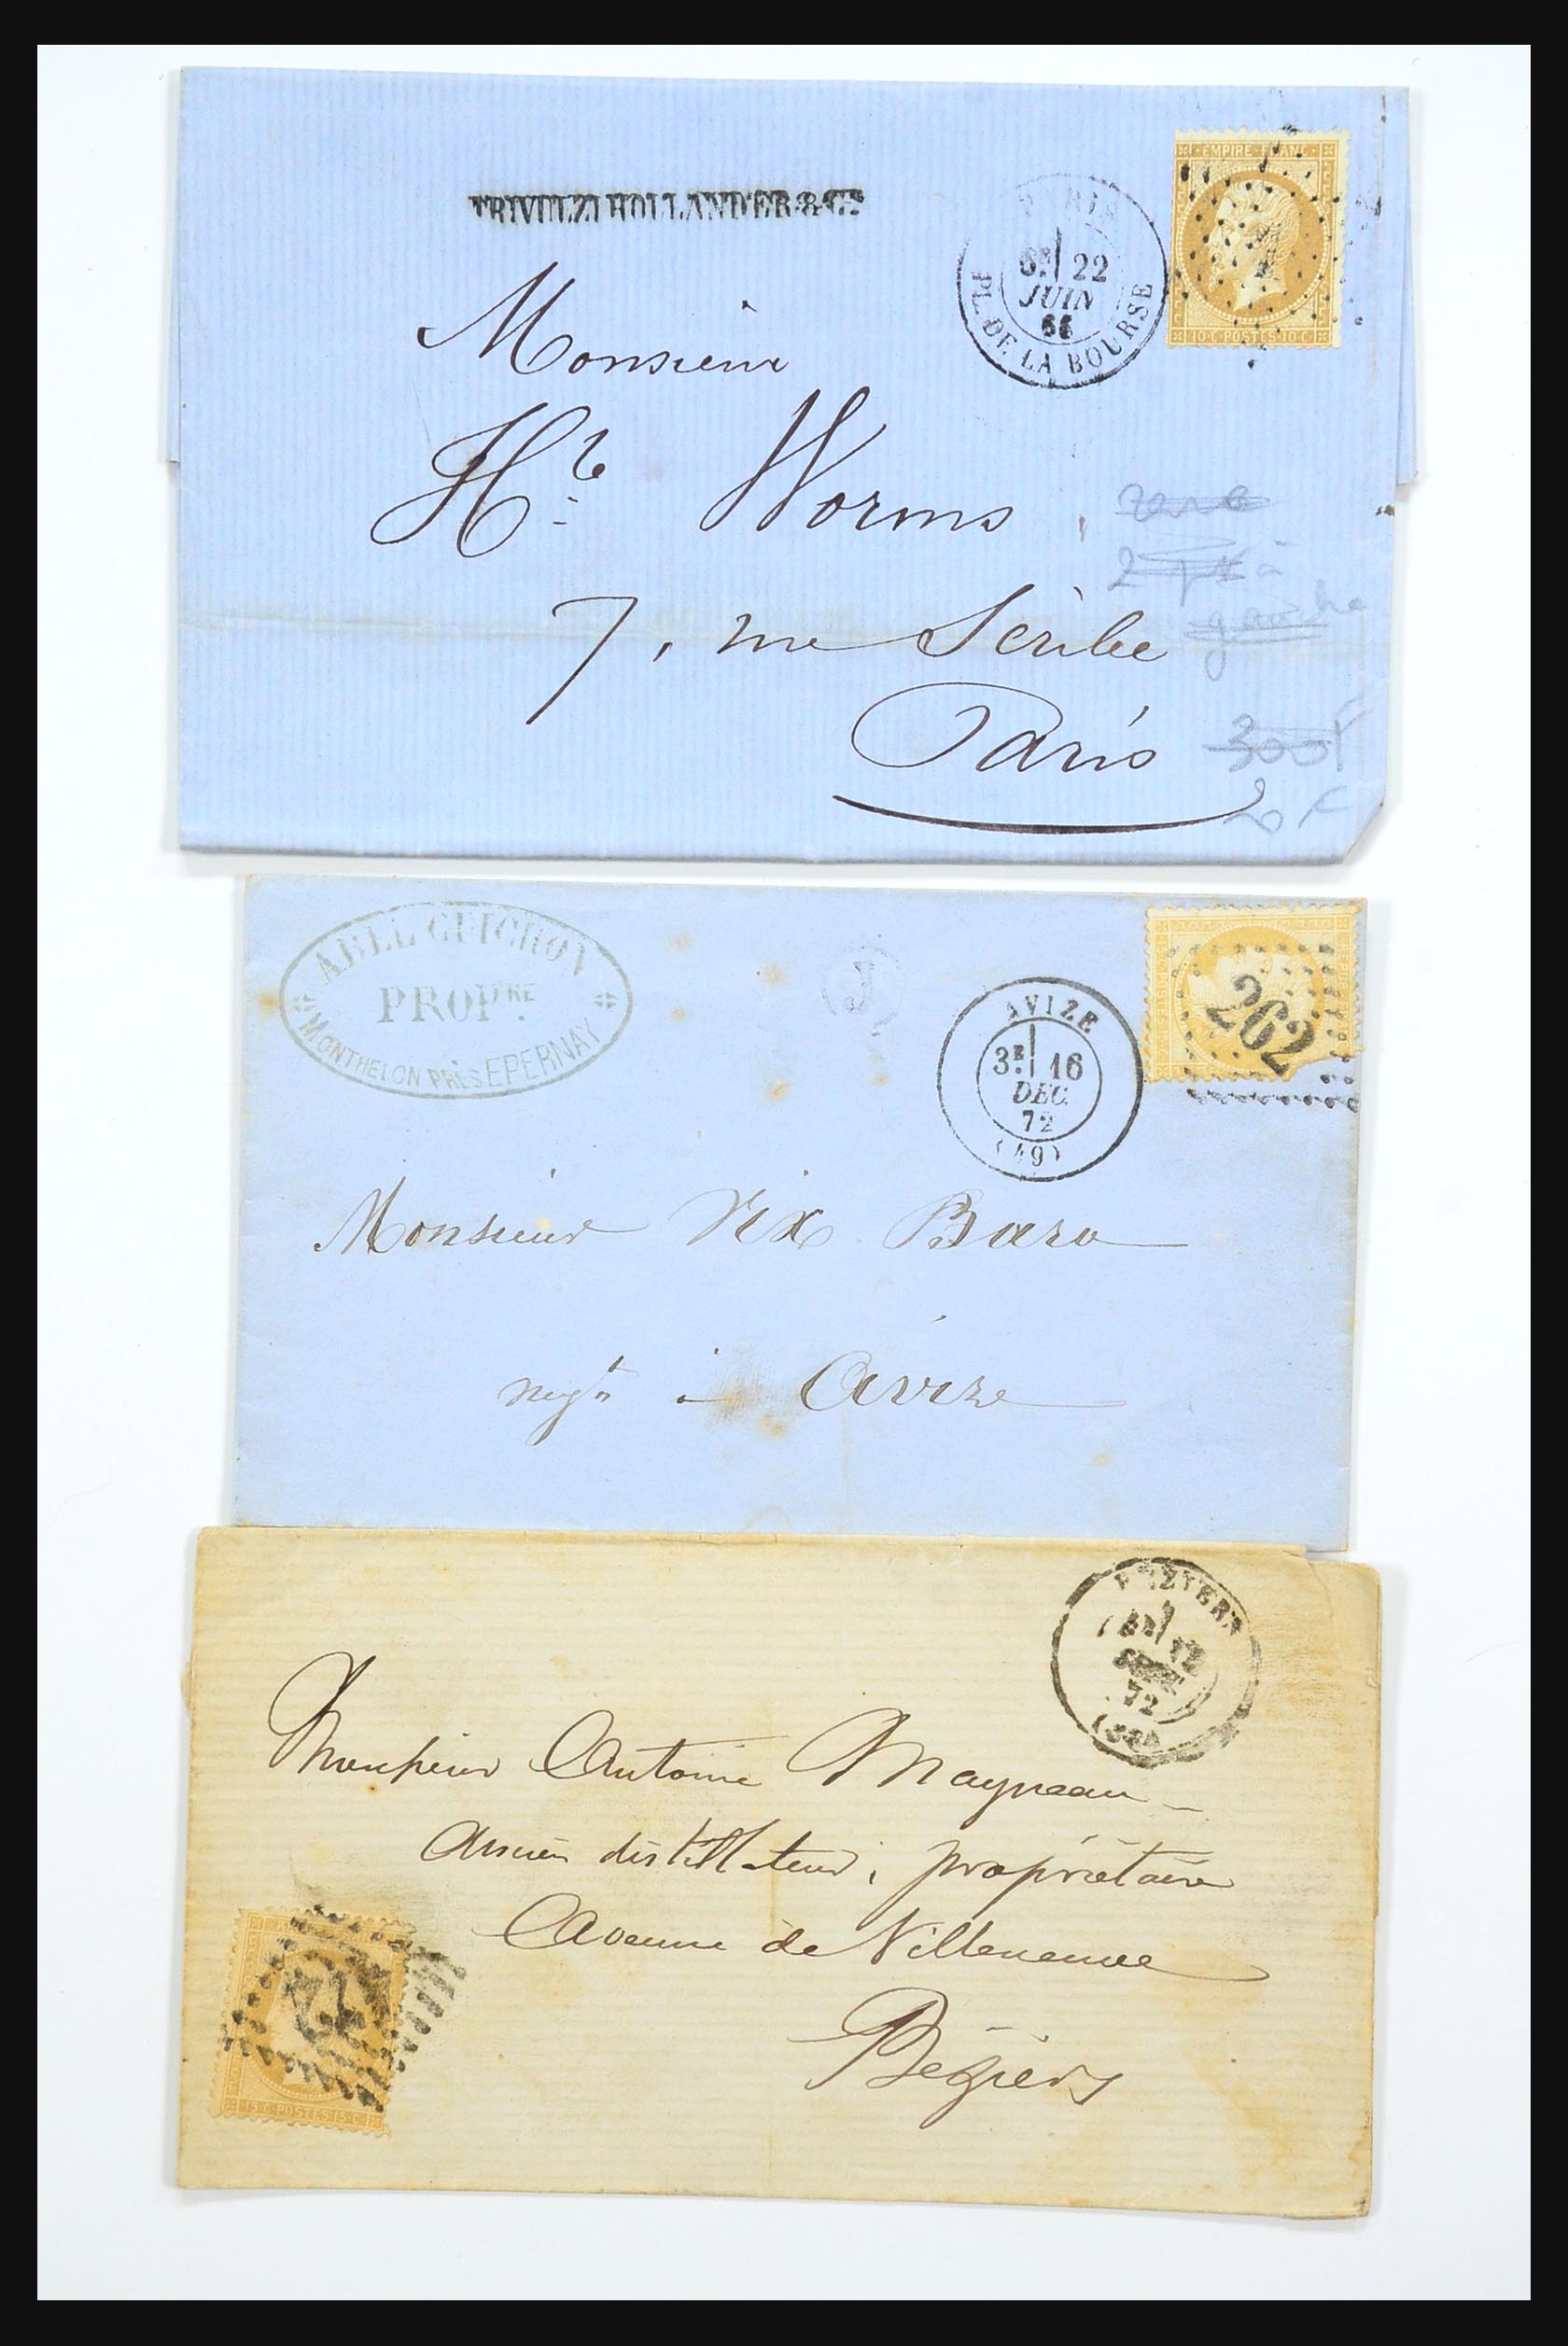 31359 2565 - 31359 France and Colonies covers 1770-1960.